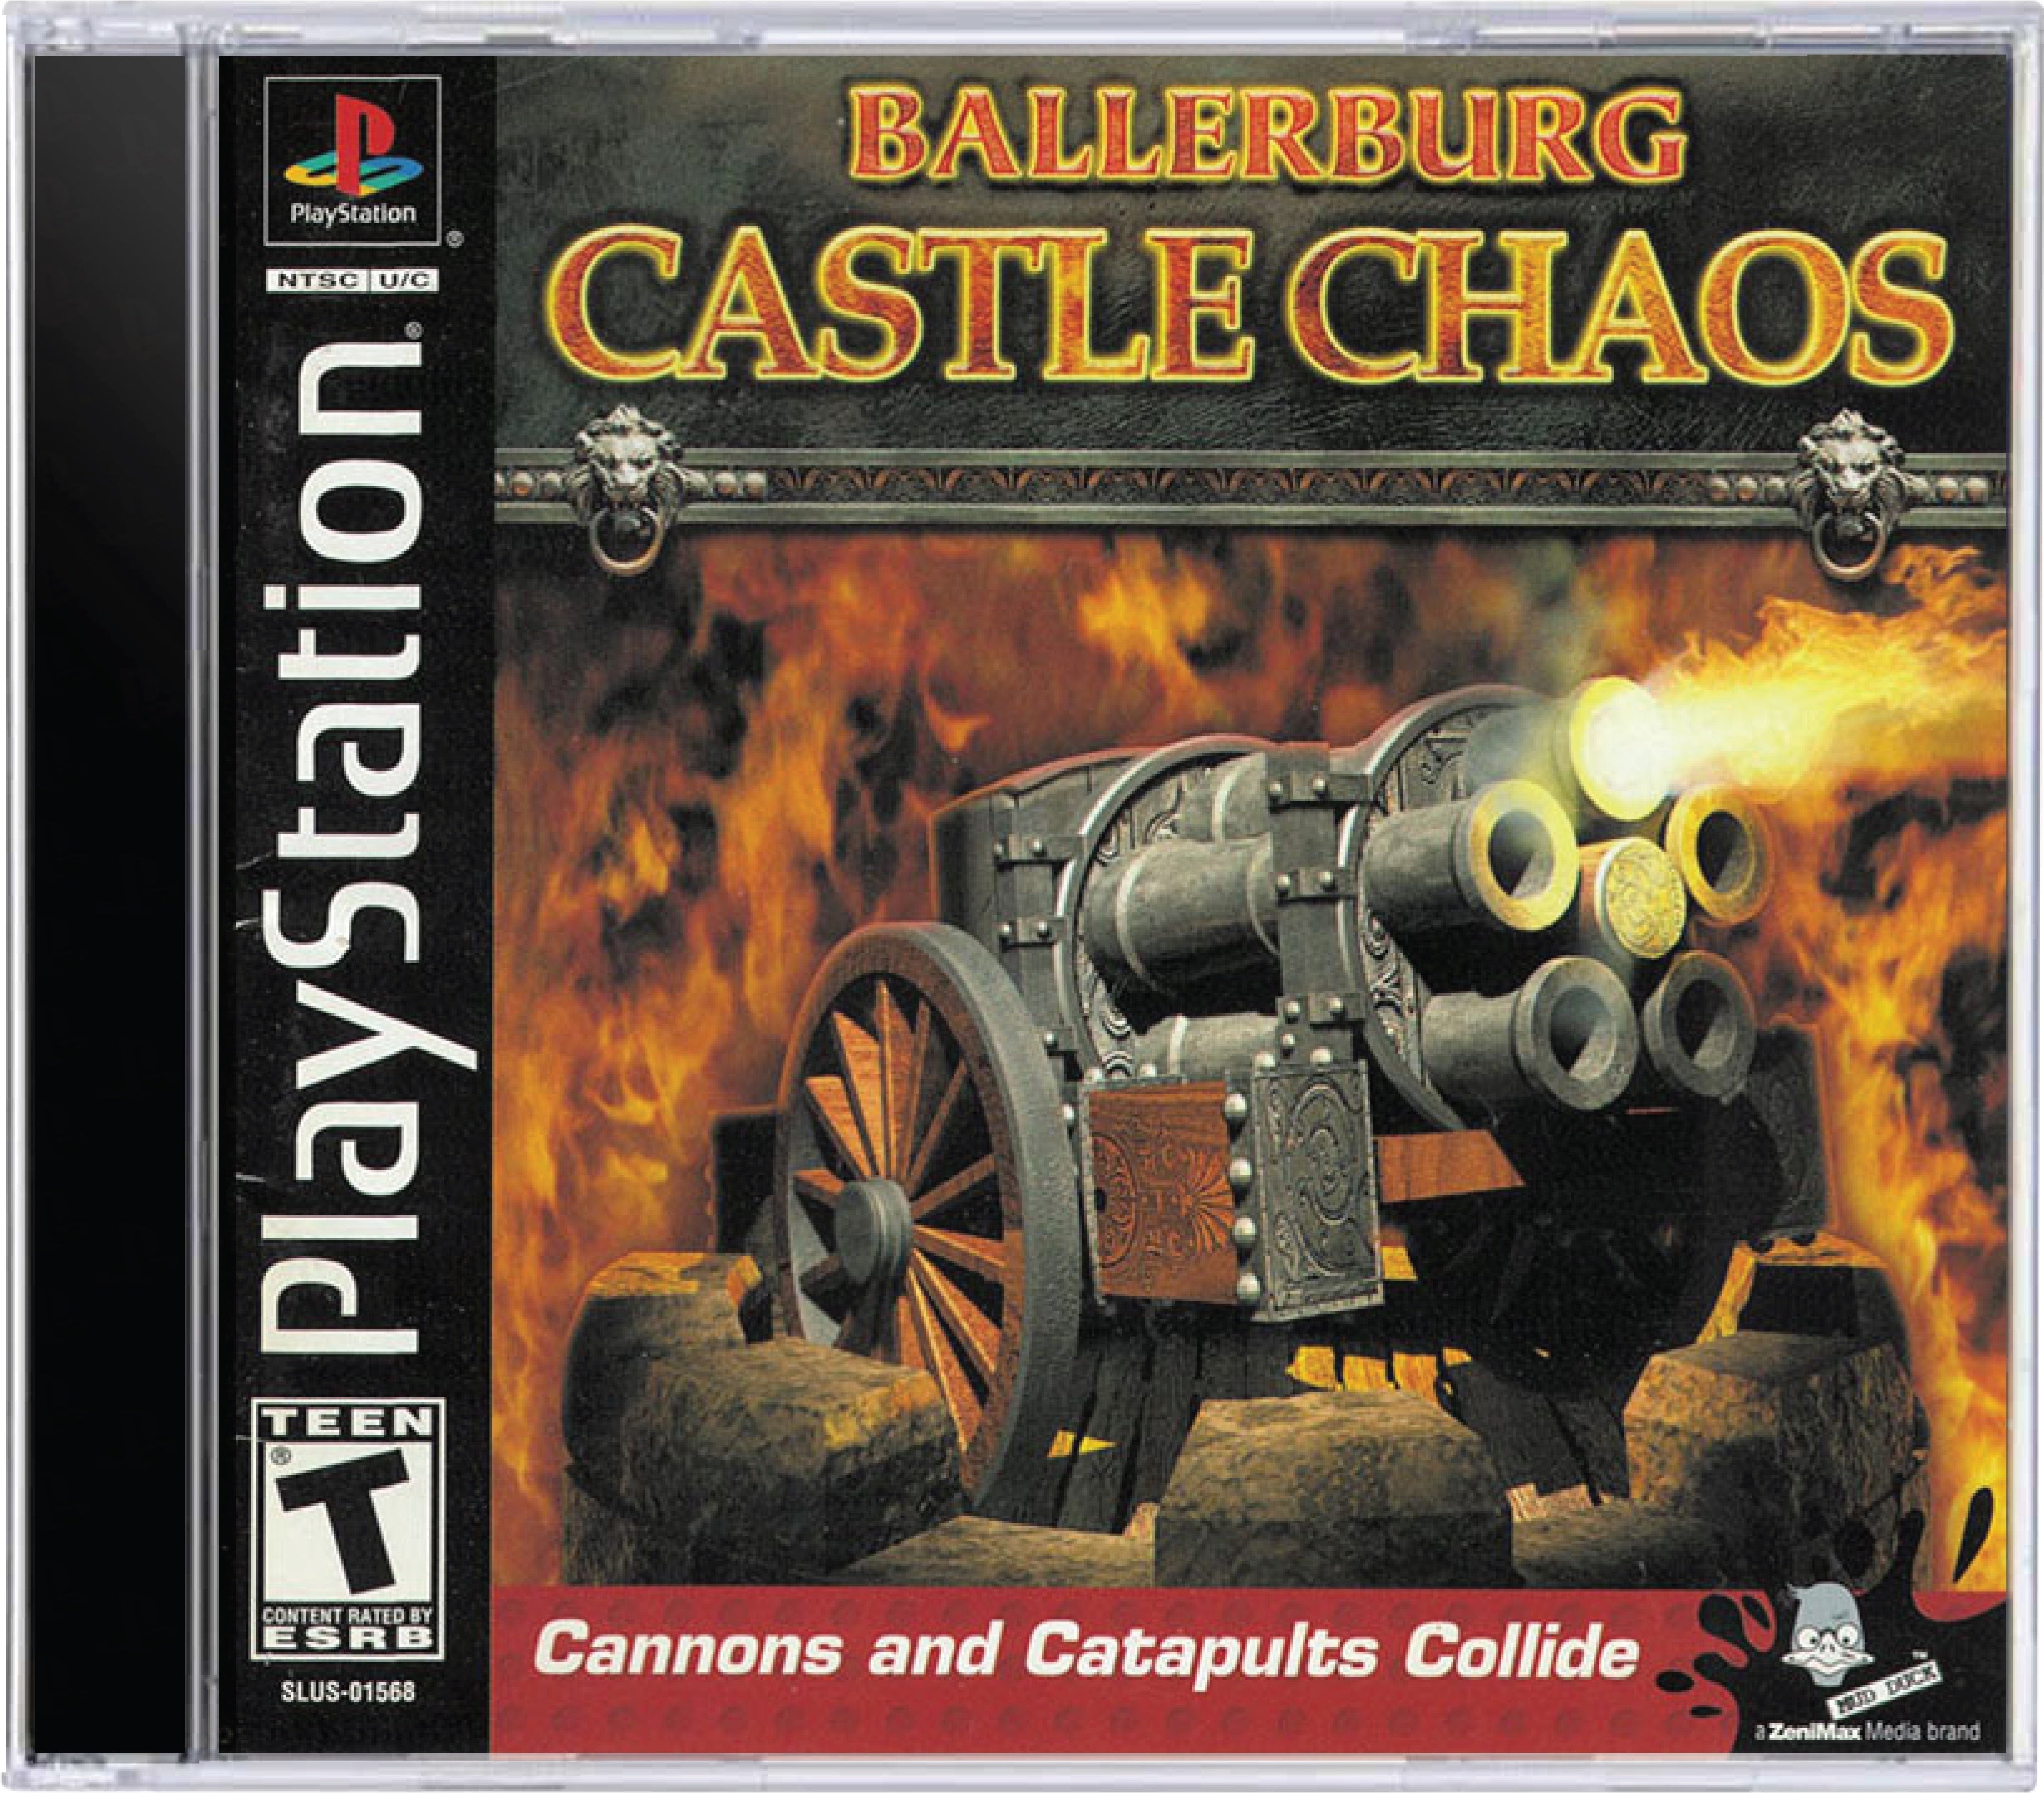 Ballerburg Castle Chaos Cover Art and Product Photo